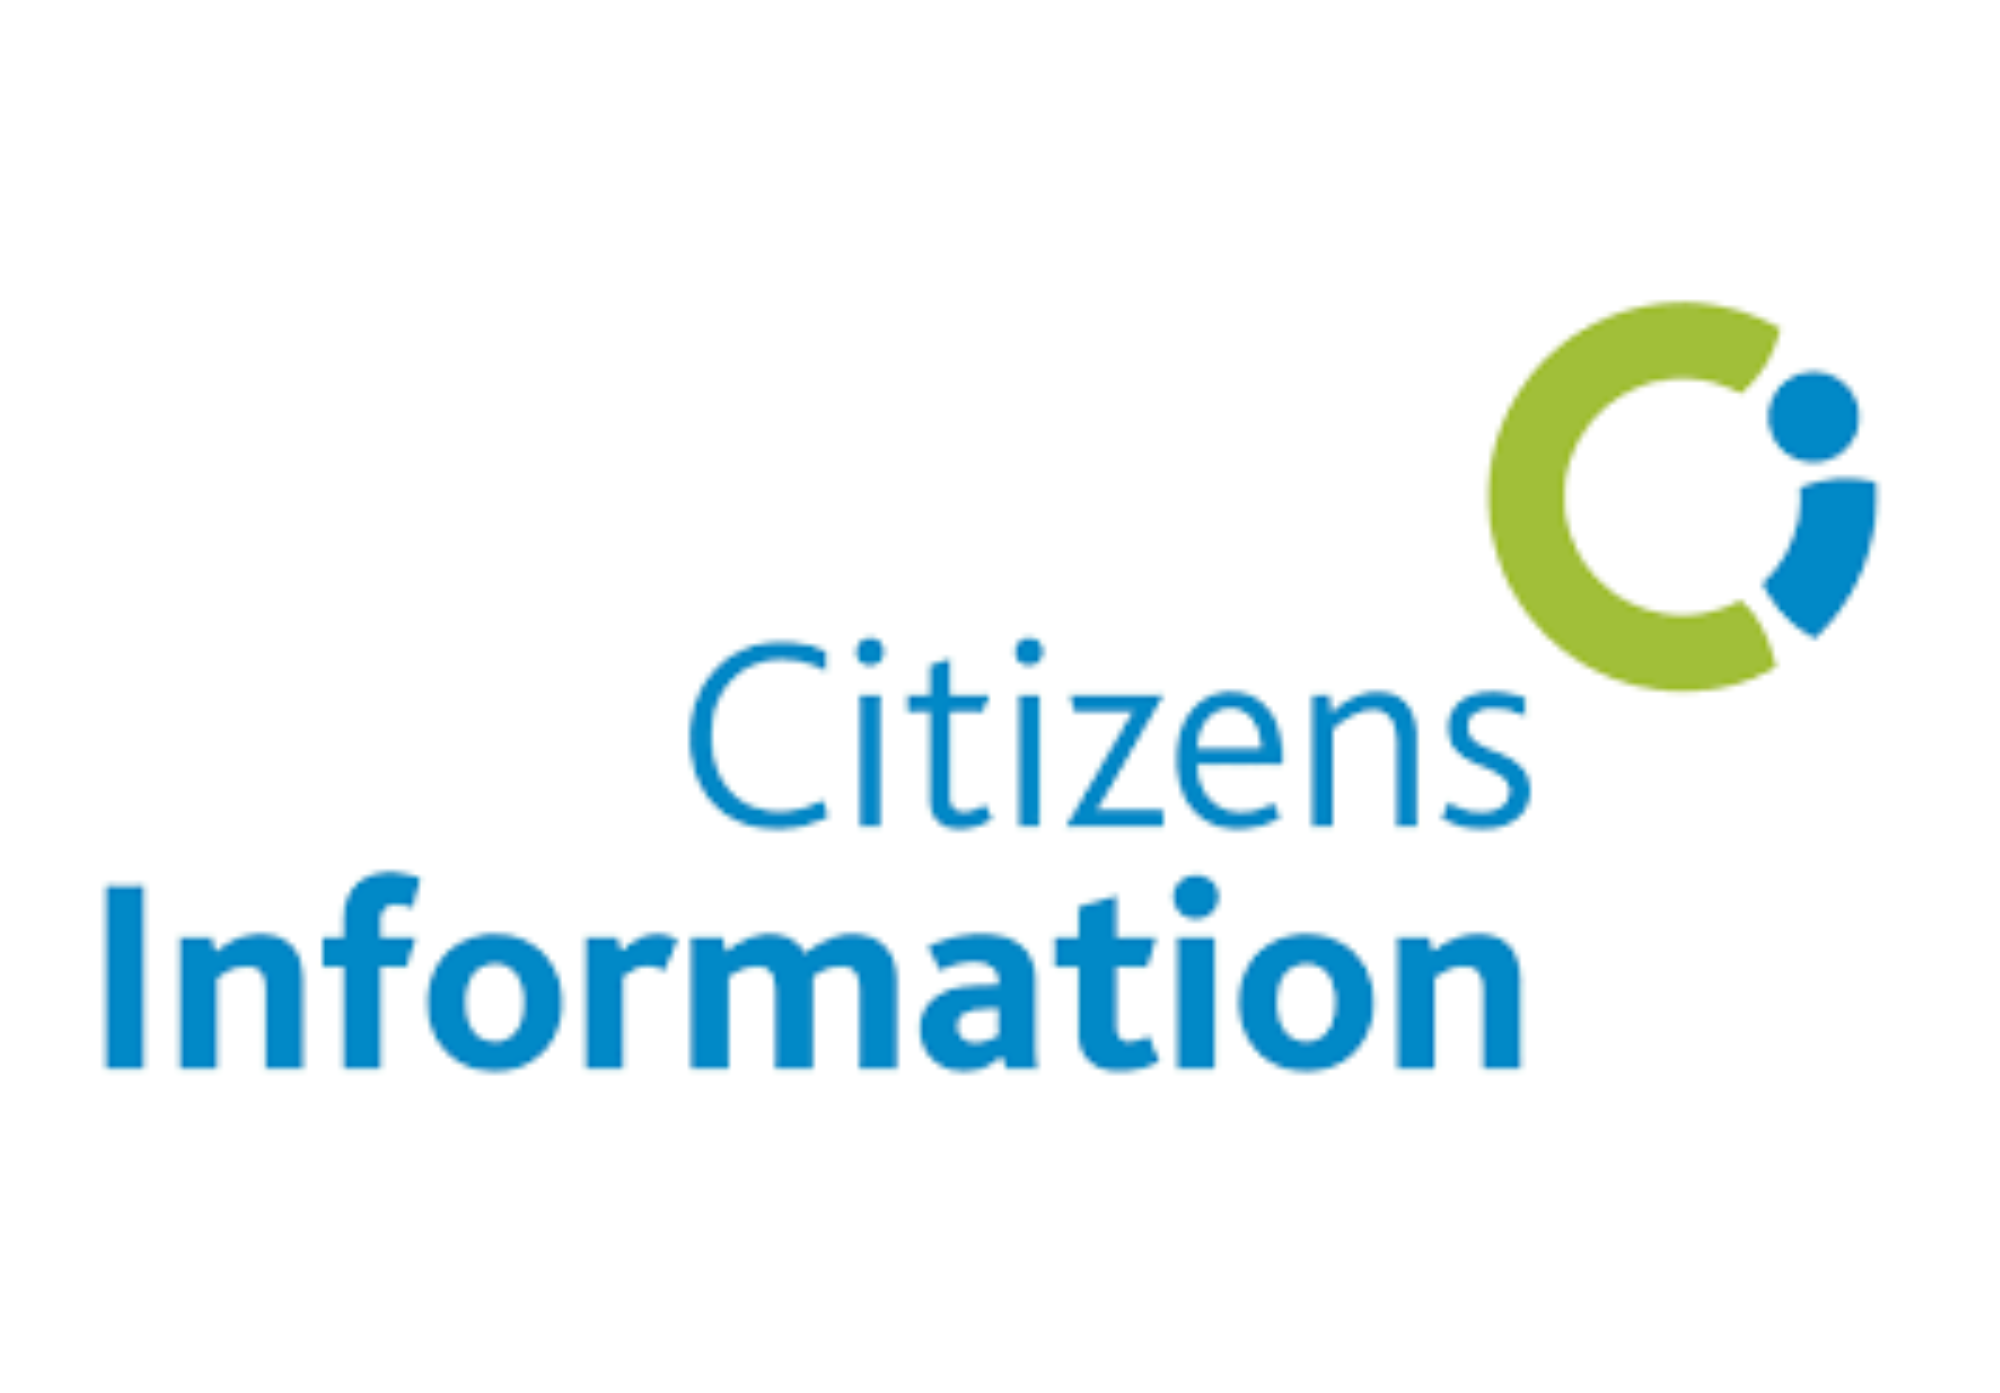 North Leinster Citizens Information Service: expressions of interest for appointment as a member of the Board of Directors